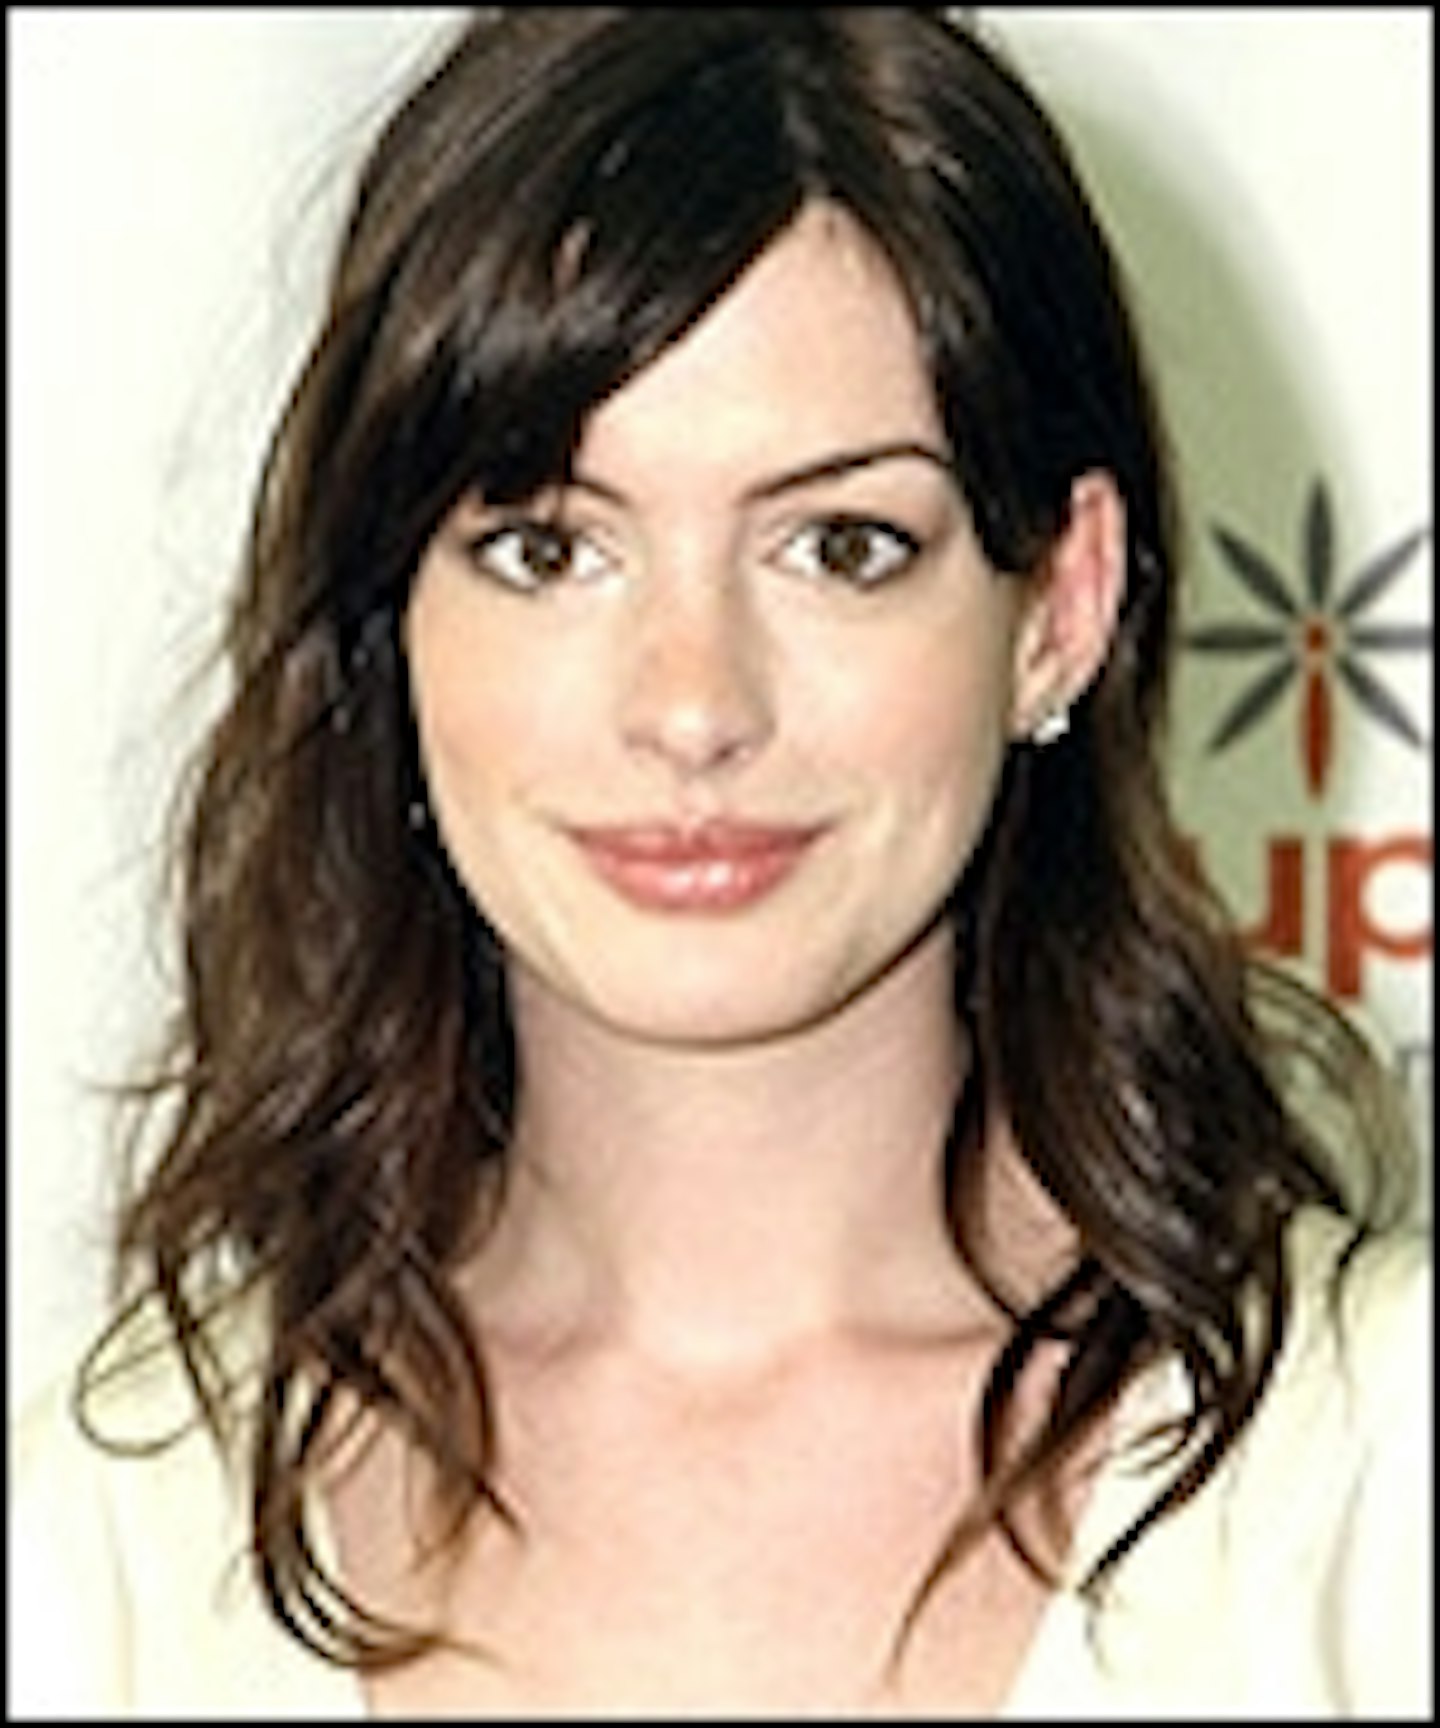 Anne Hathaway Lines Up The Fiance